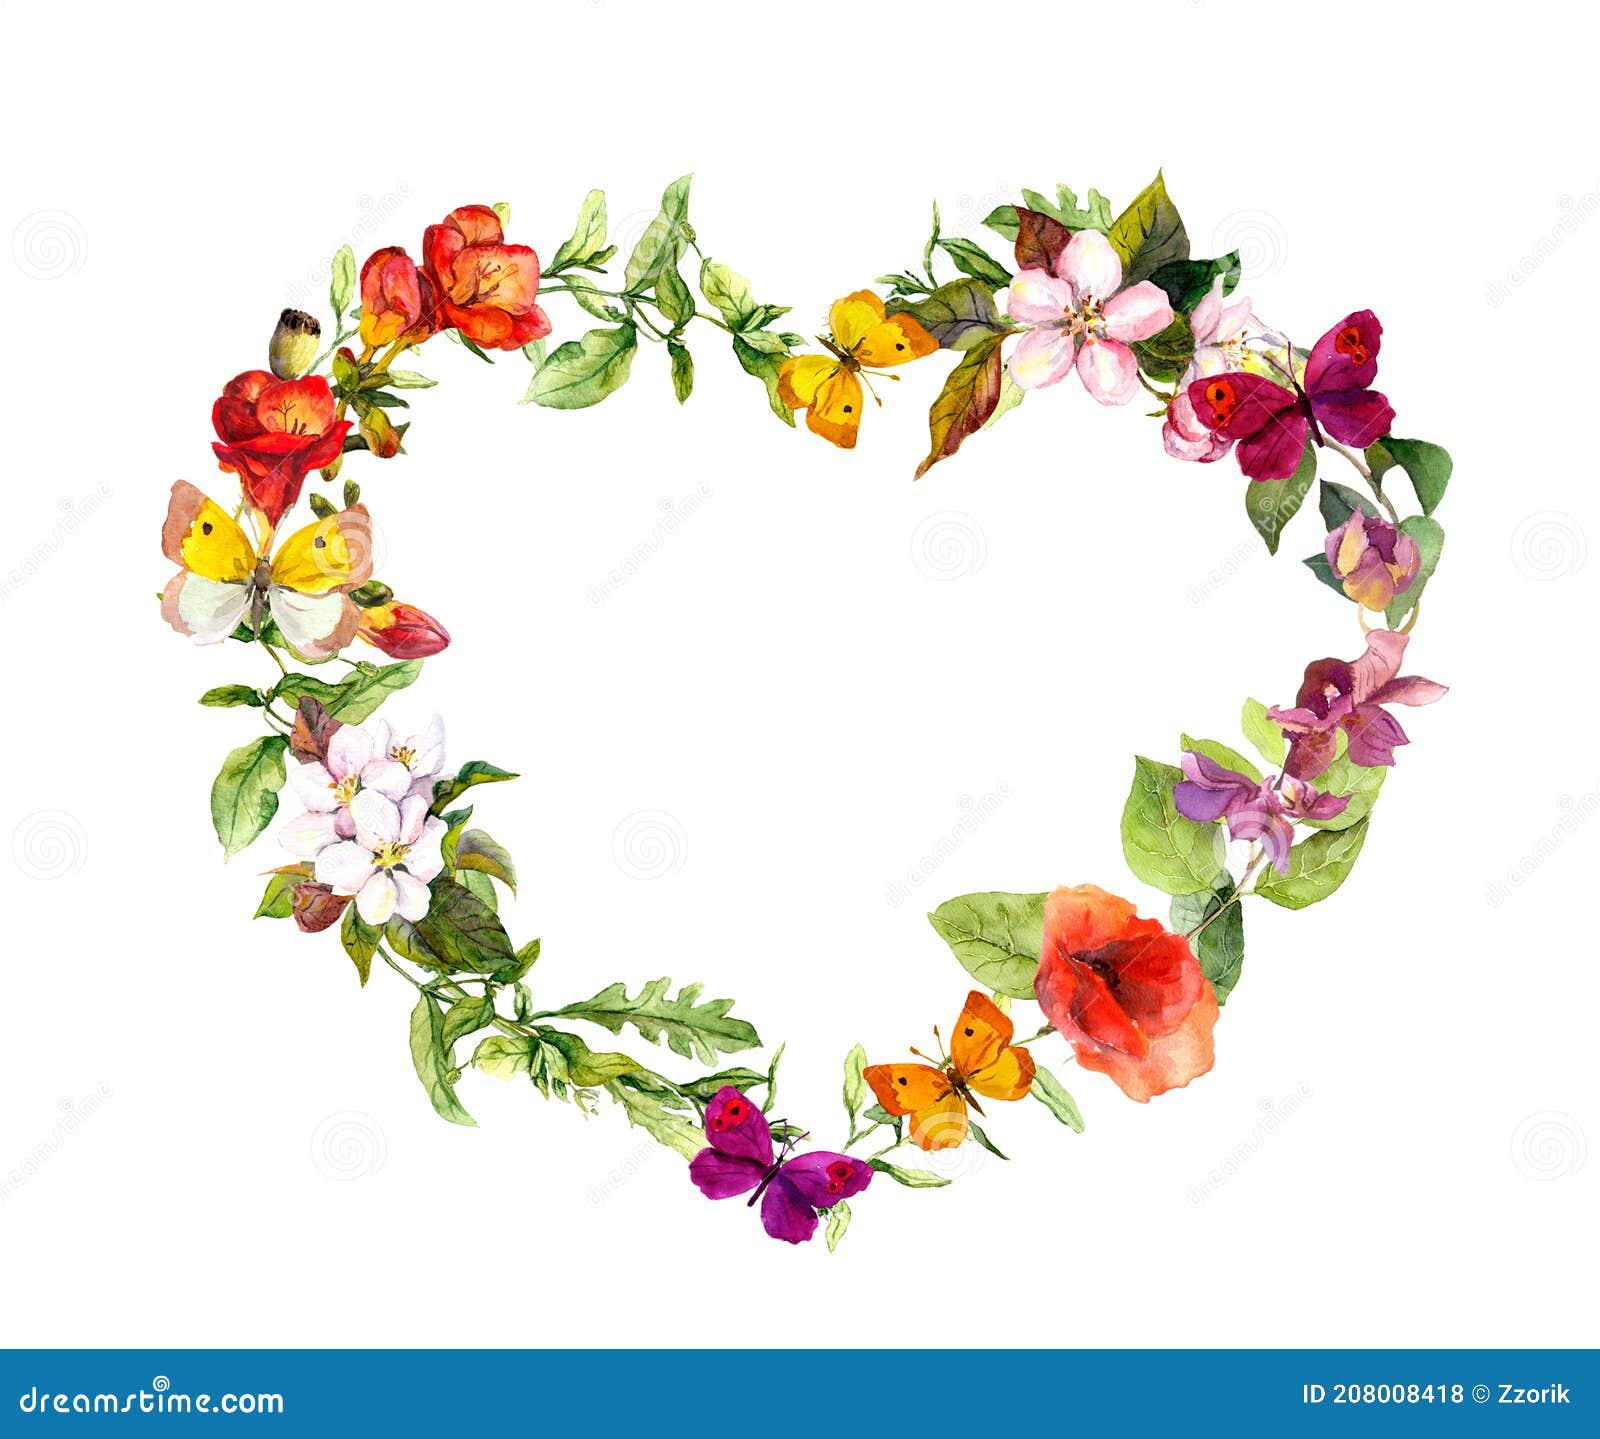 Floral Love Shape Heart Of Butterflies Vector Illustration Royalty Free  SVG, Cliparts, Vectors, and Stock Illustration. Image 23856168.